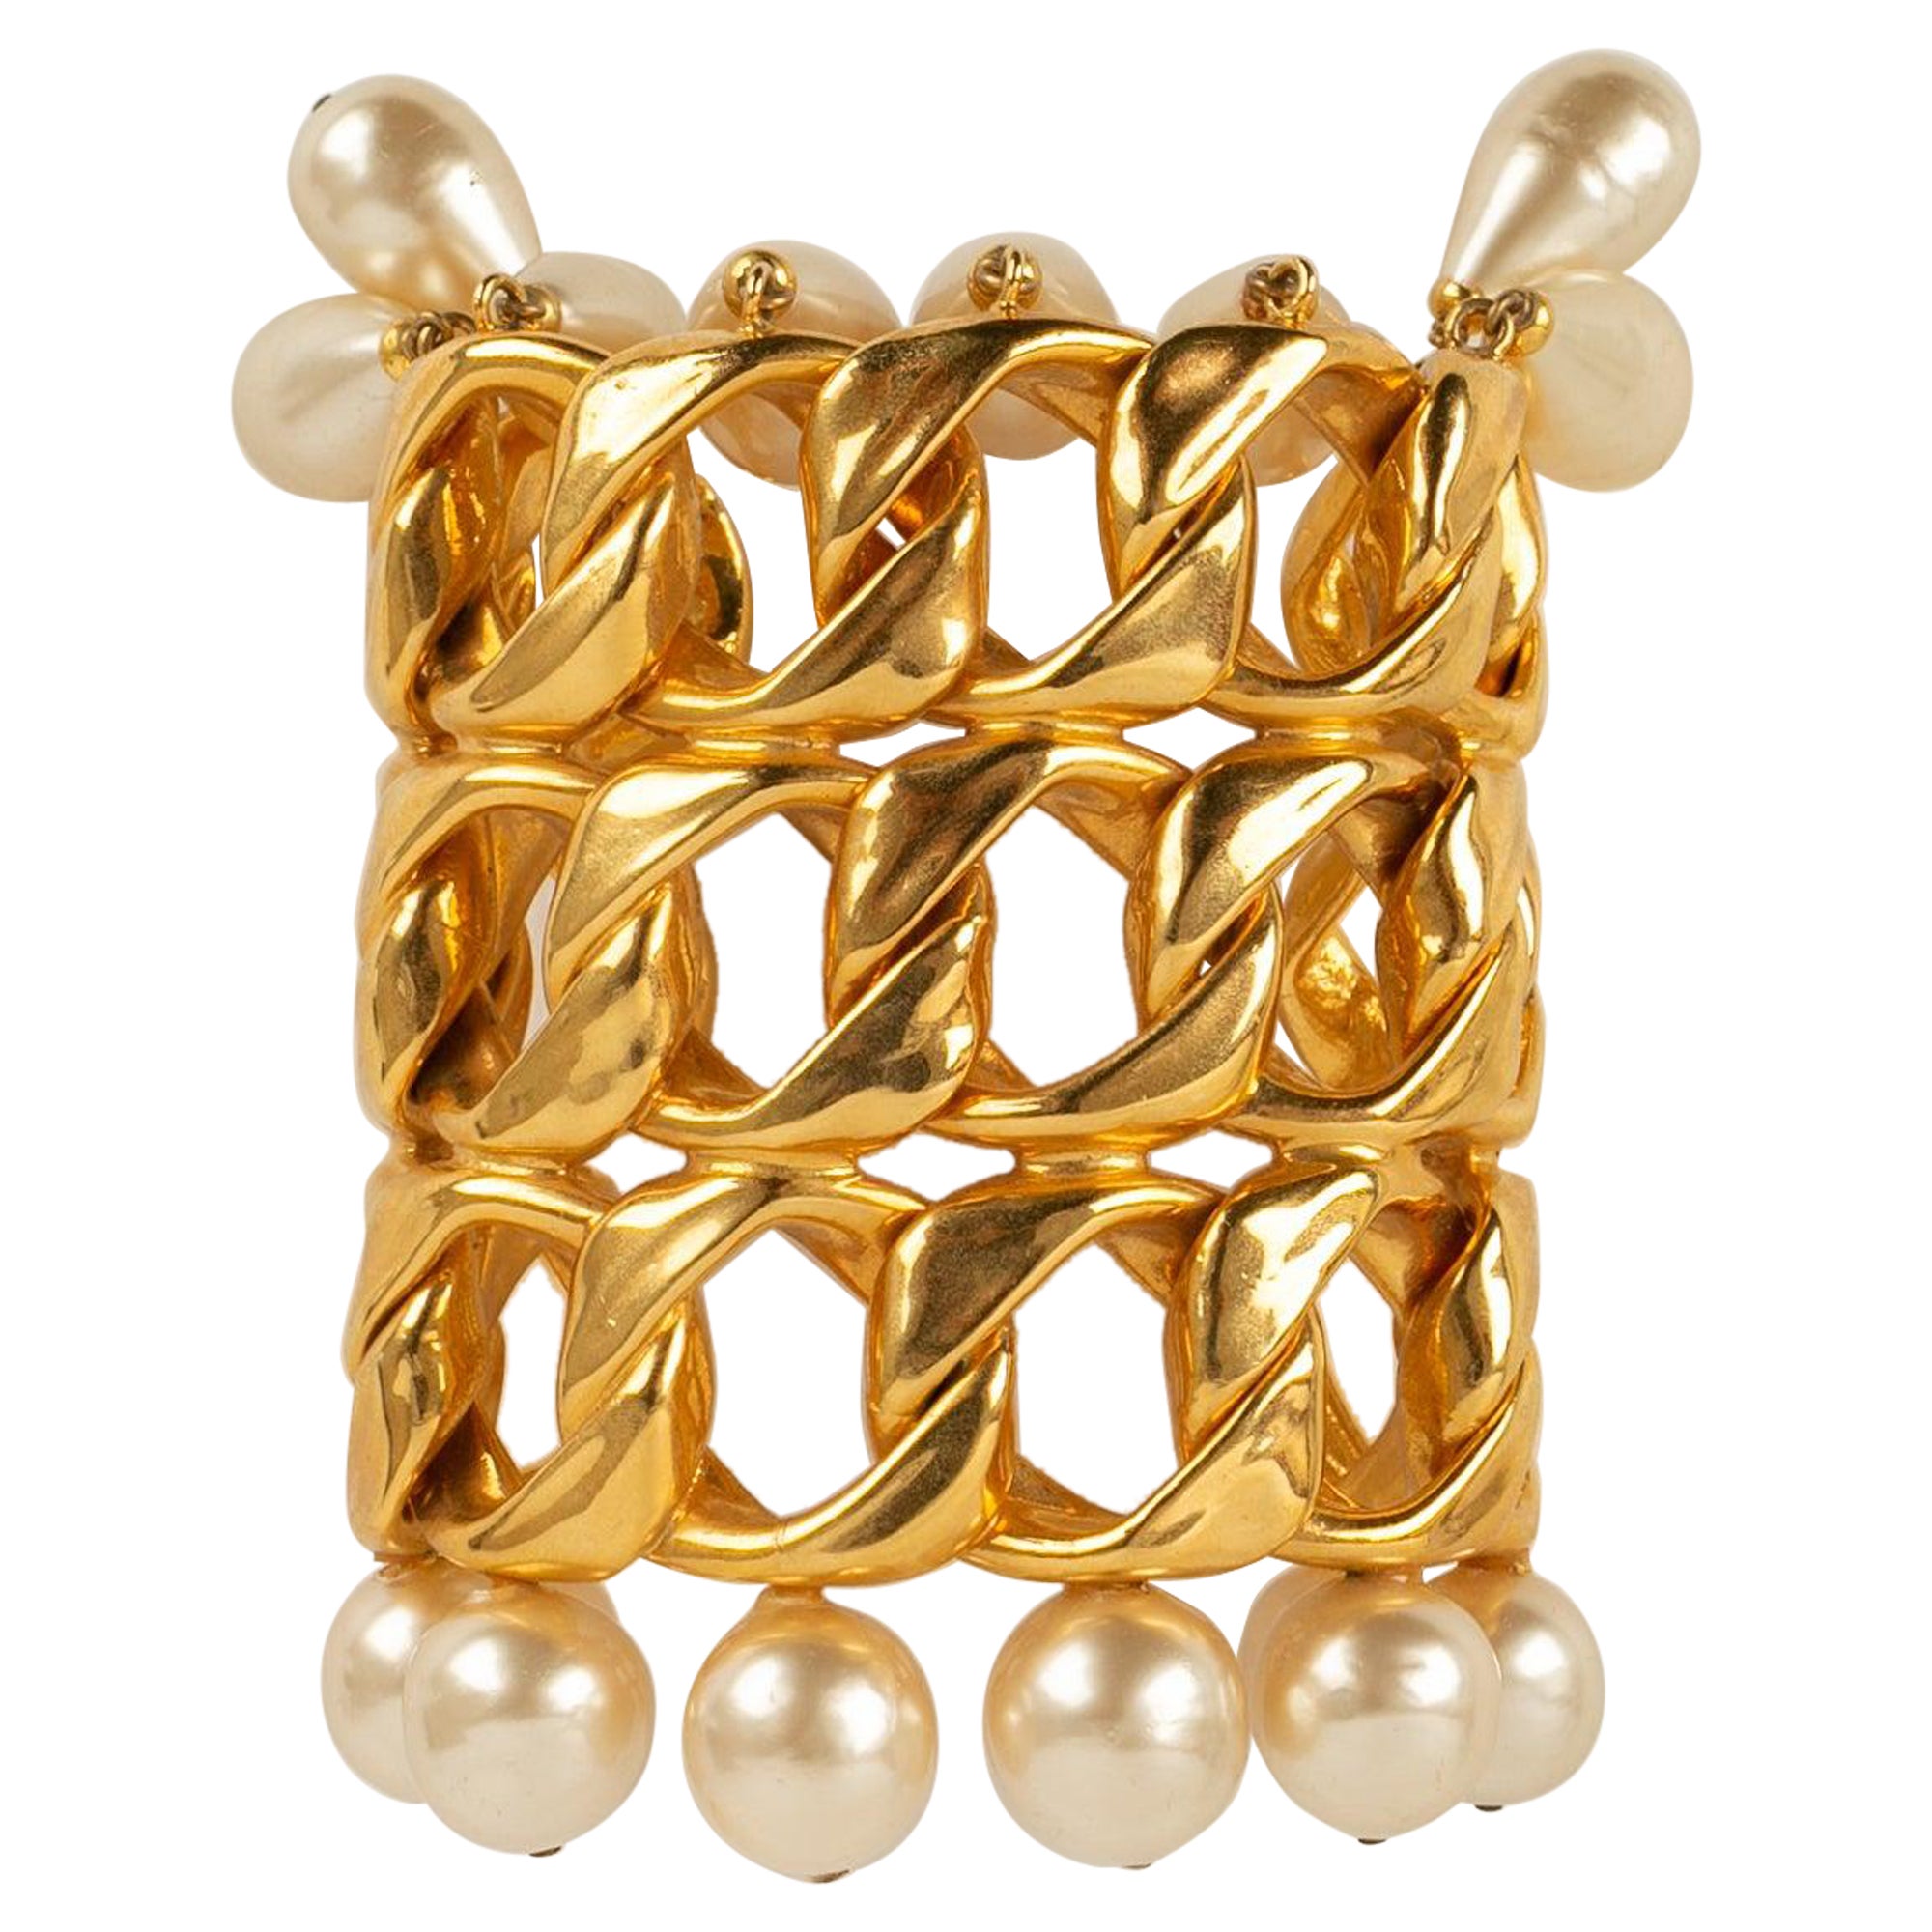 Chanel Cuff Bracelet in Golden Metal, Costume Pearls, and Pearly Drops For Sale